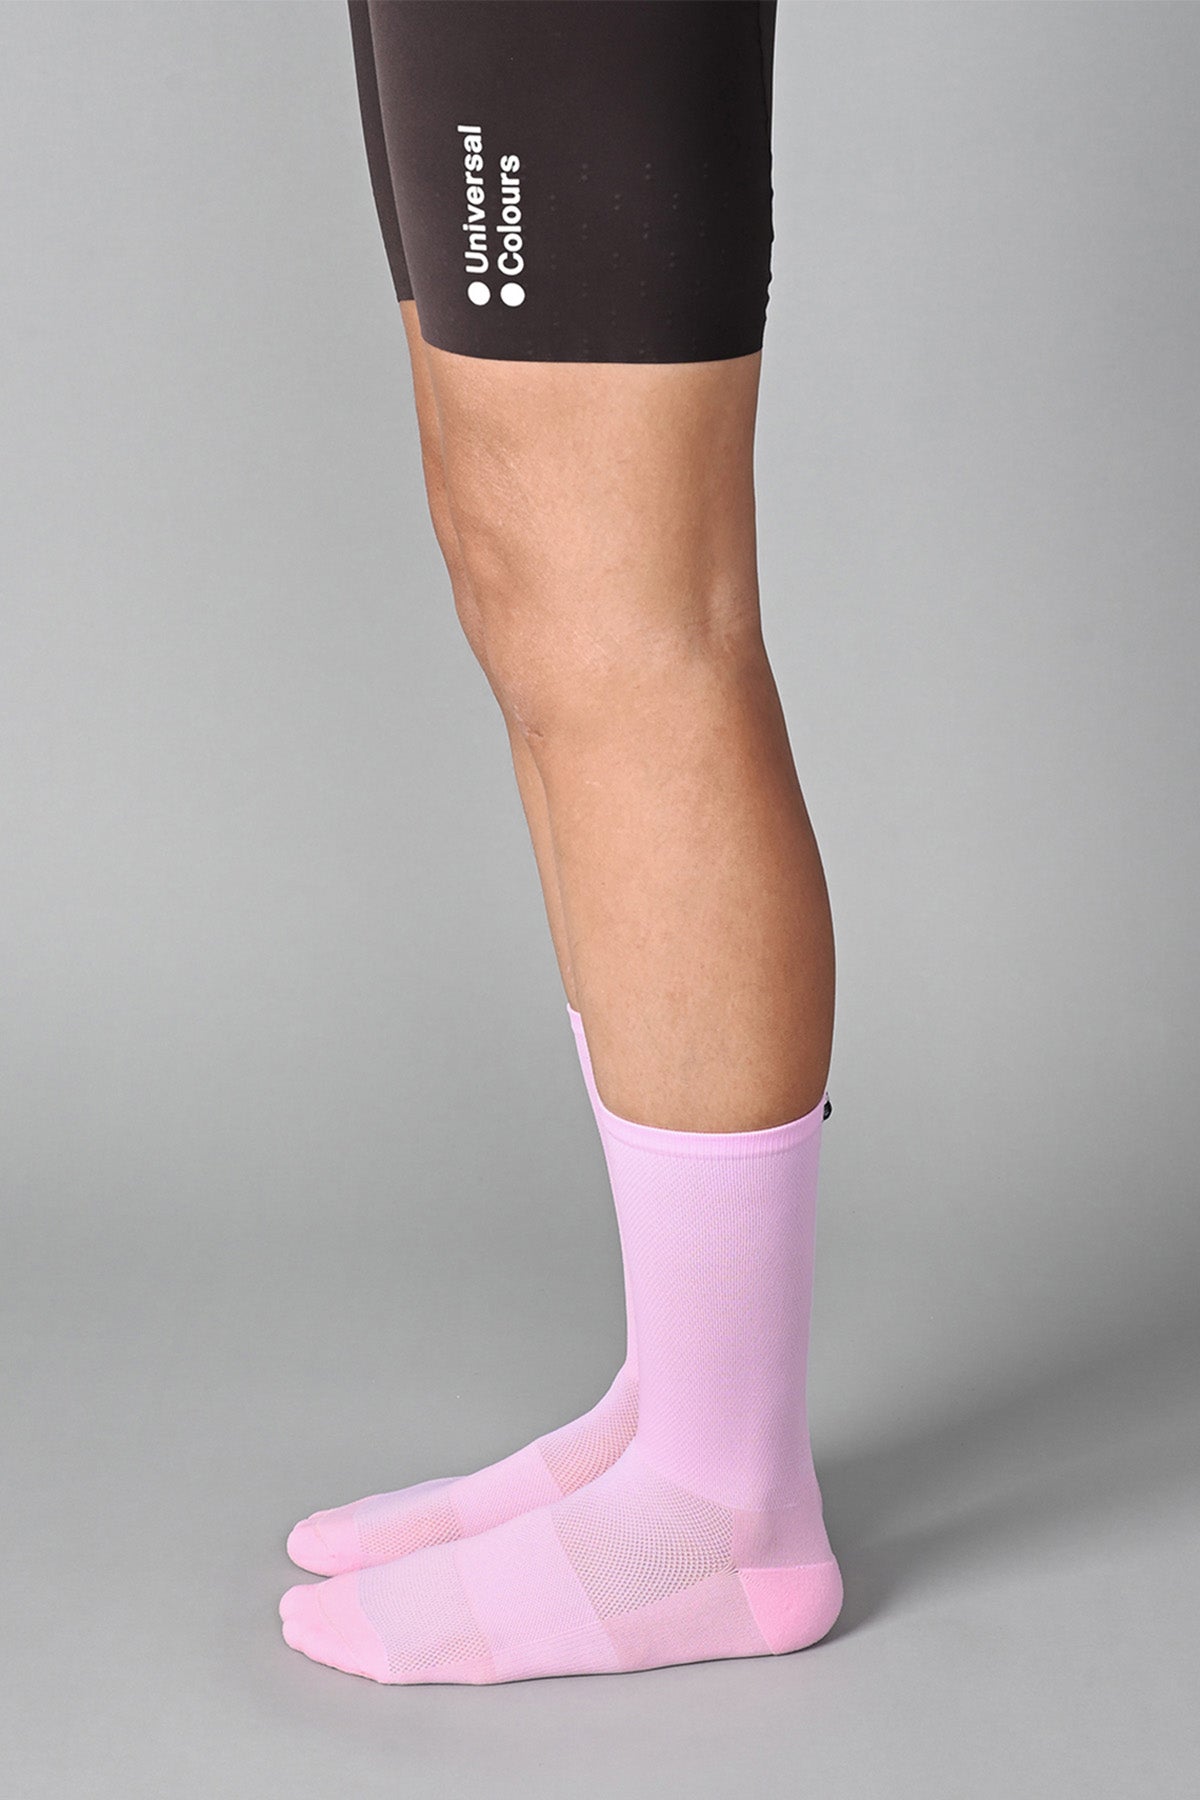 STEALTH - CAMEO PINK SIDE | BEST CYCLING SOCKS